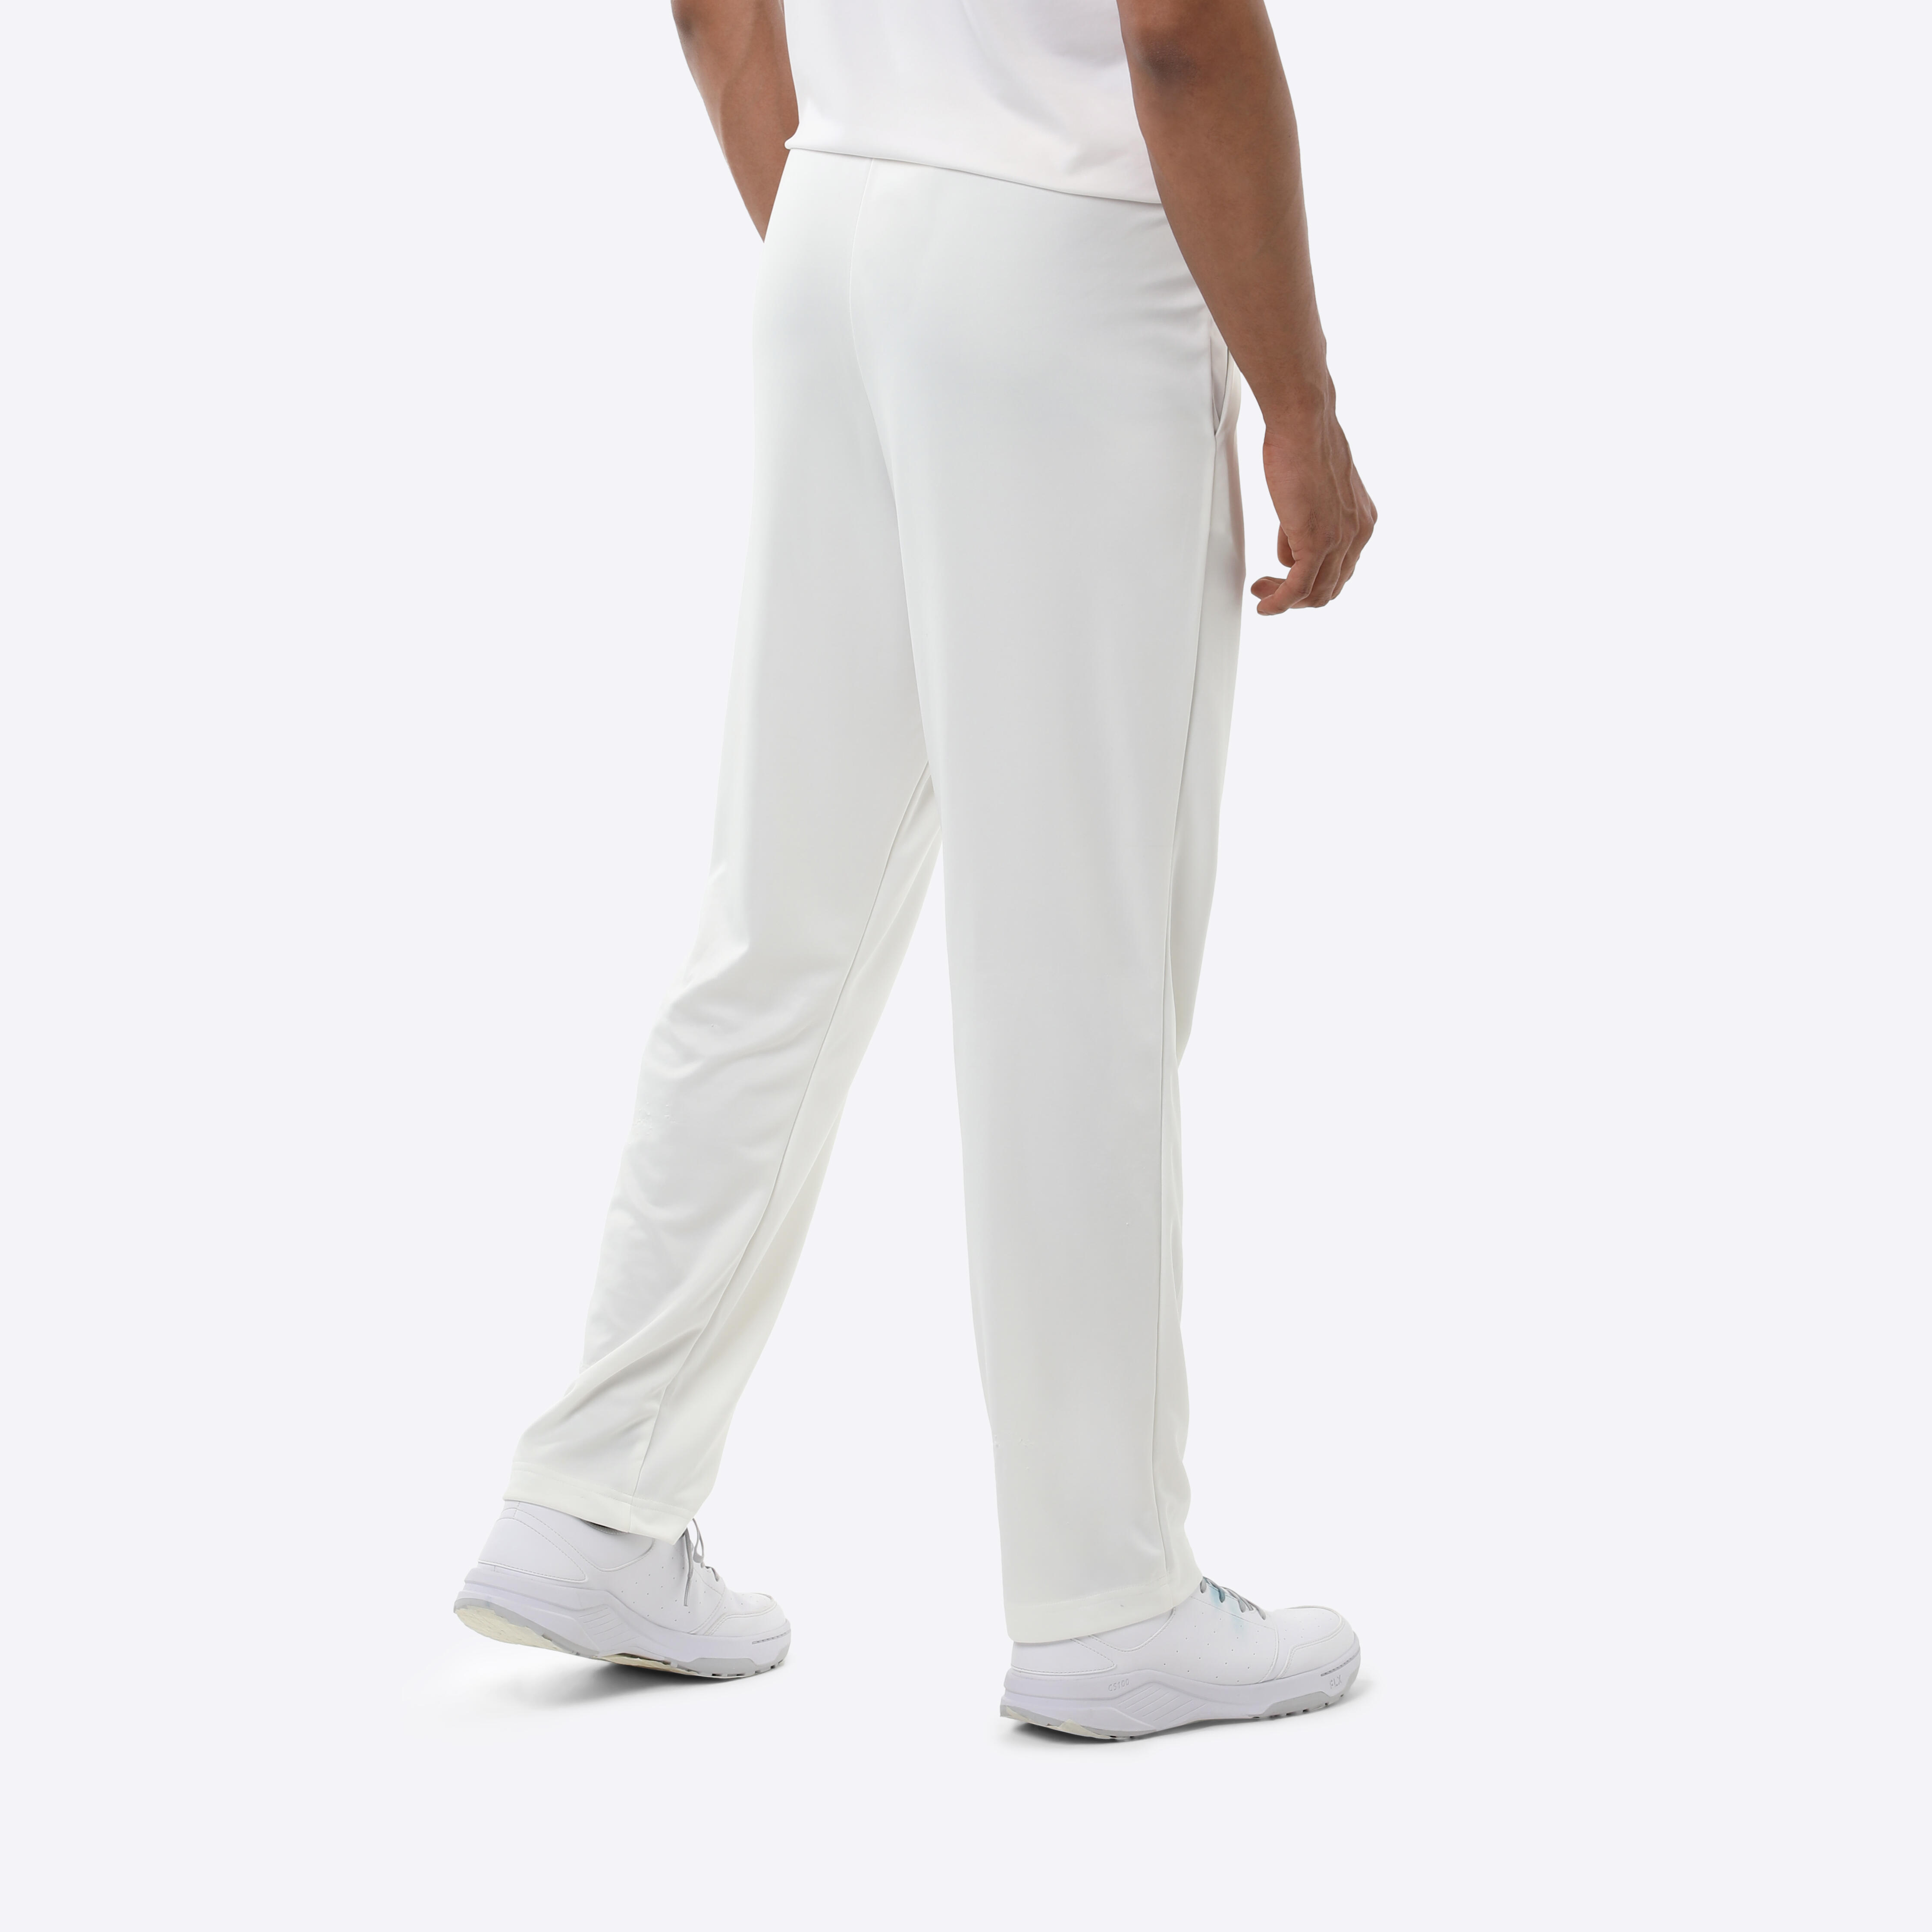 Cricket Outfit | Adult & Kids' | Decathlon